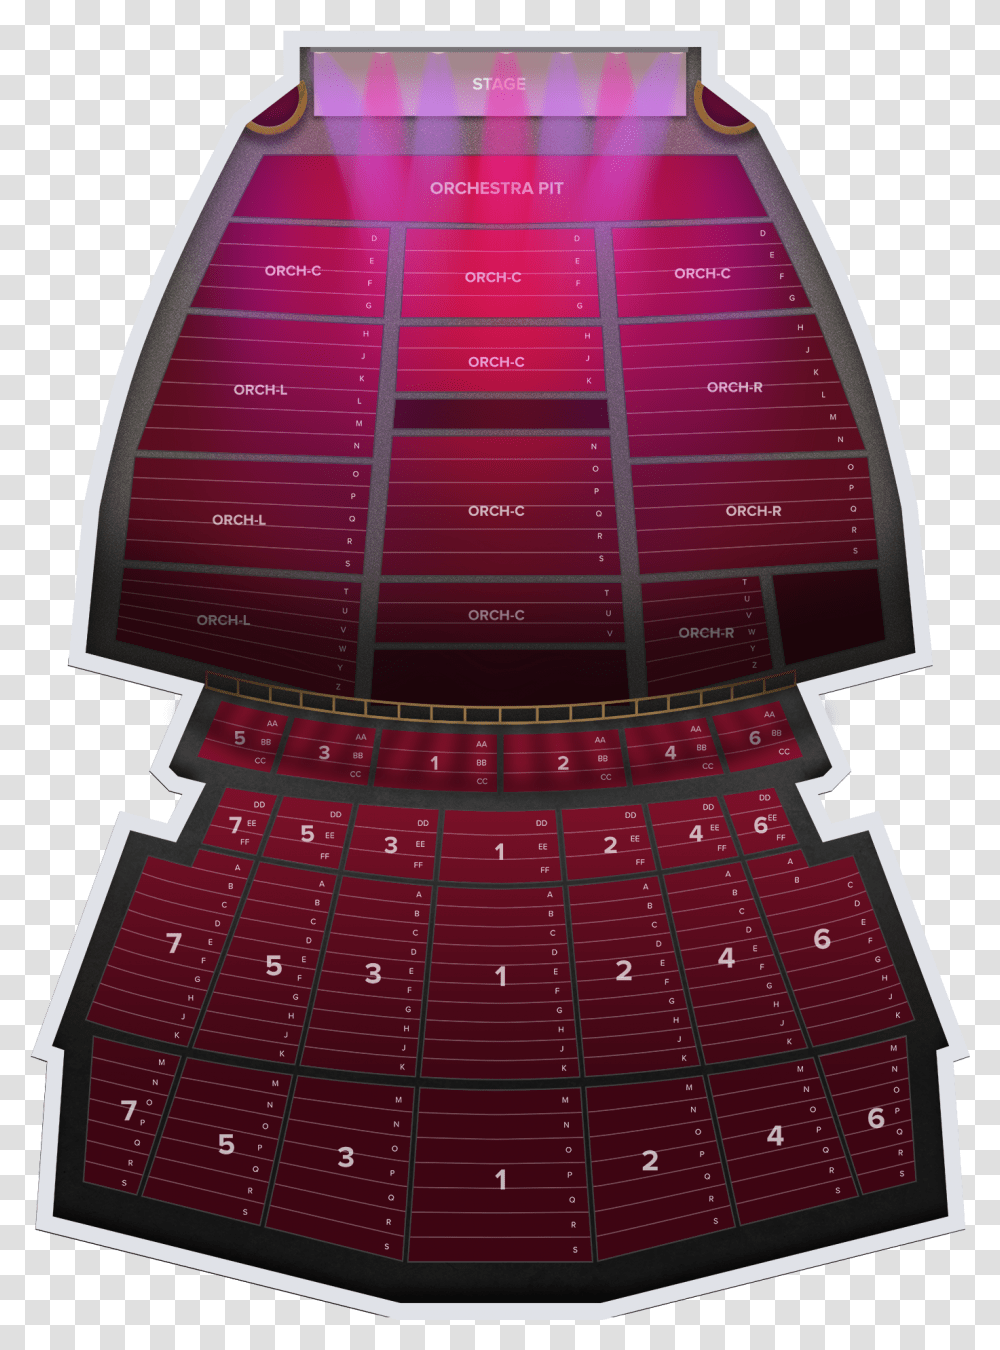 Killswitch Engage Vertical, Scoreboard, Lighting, Text, Arcade Game Machine Transparent Png